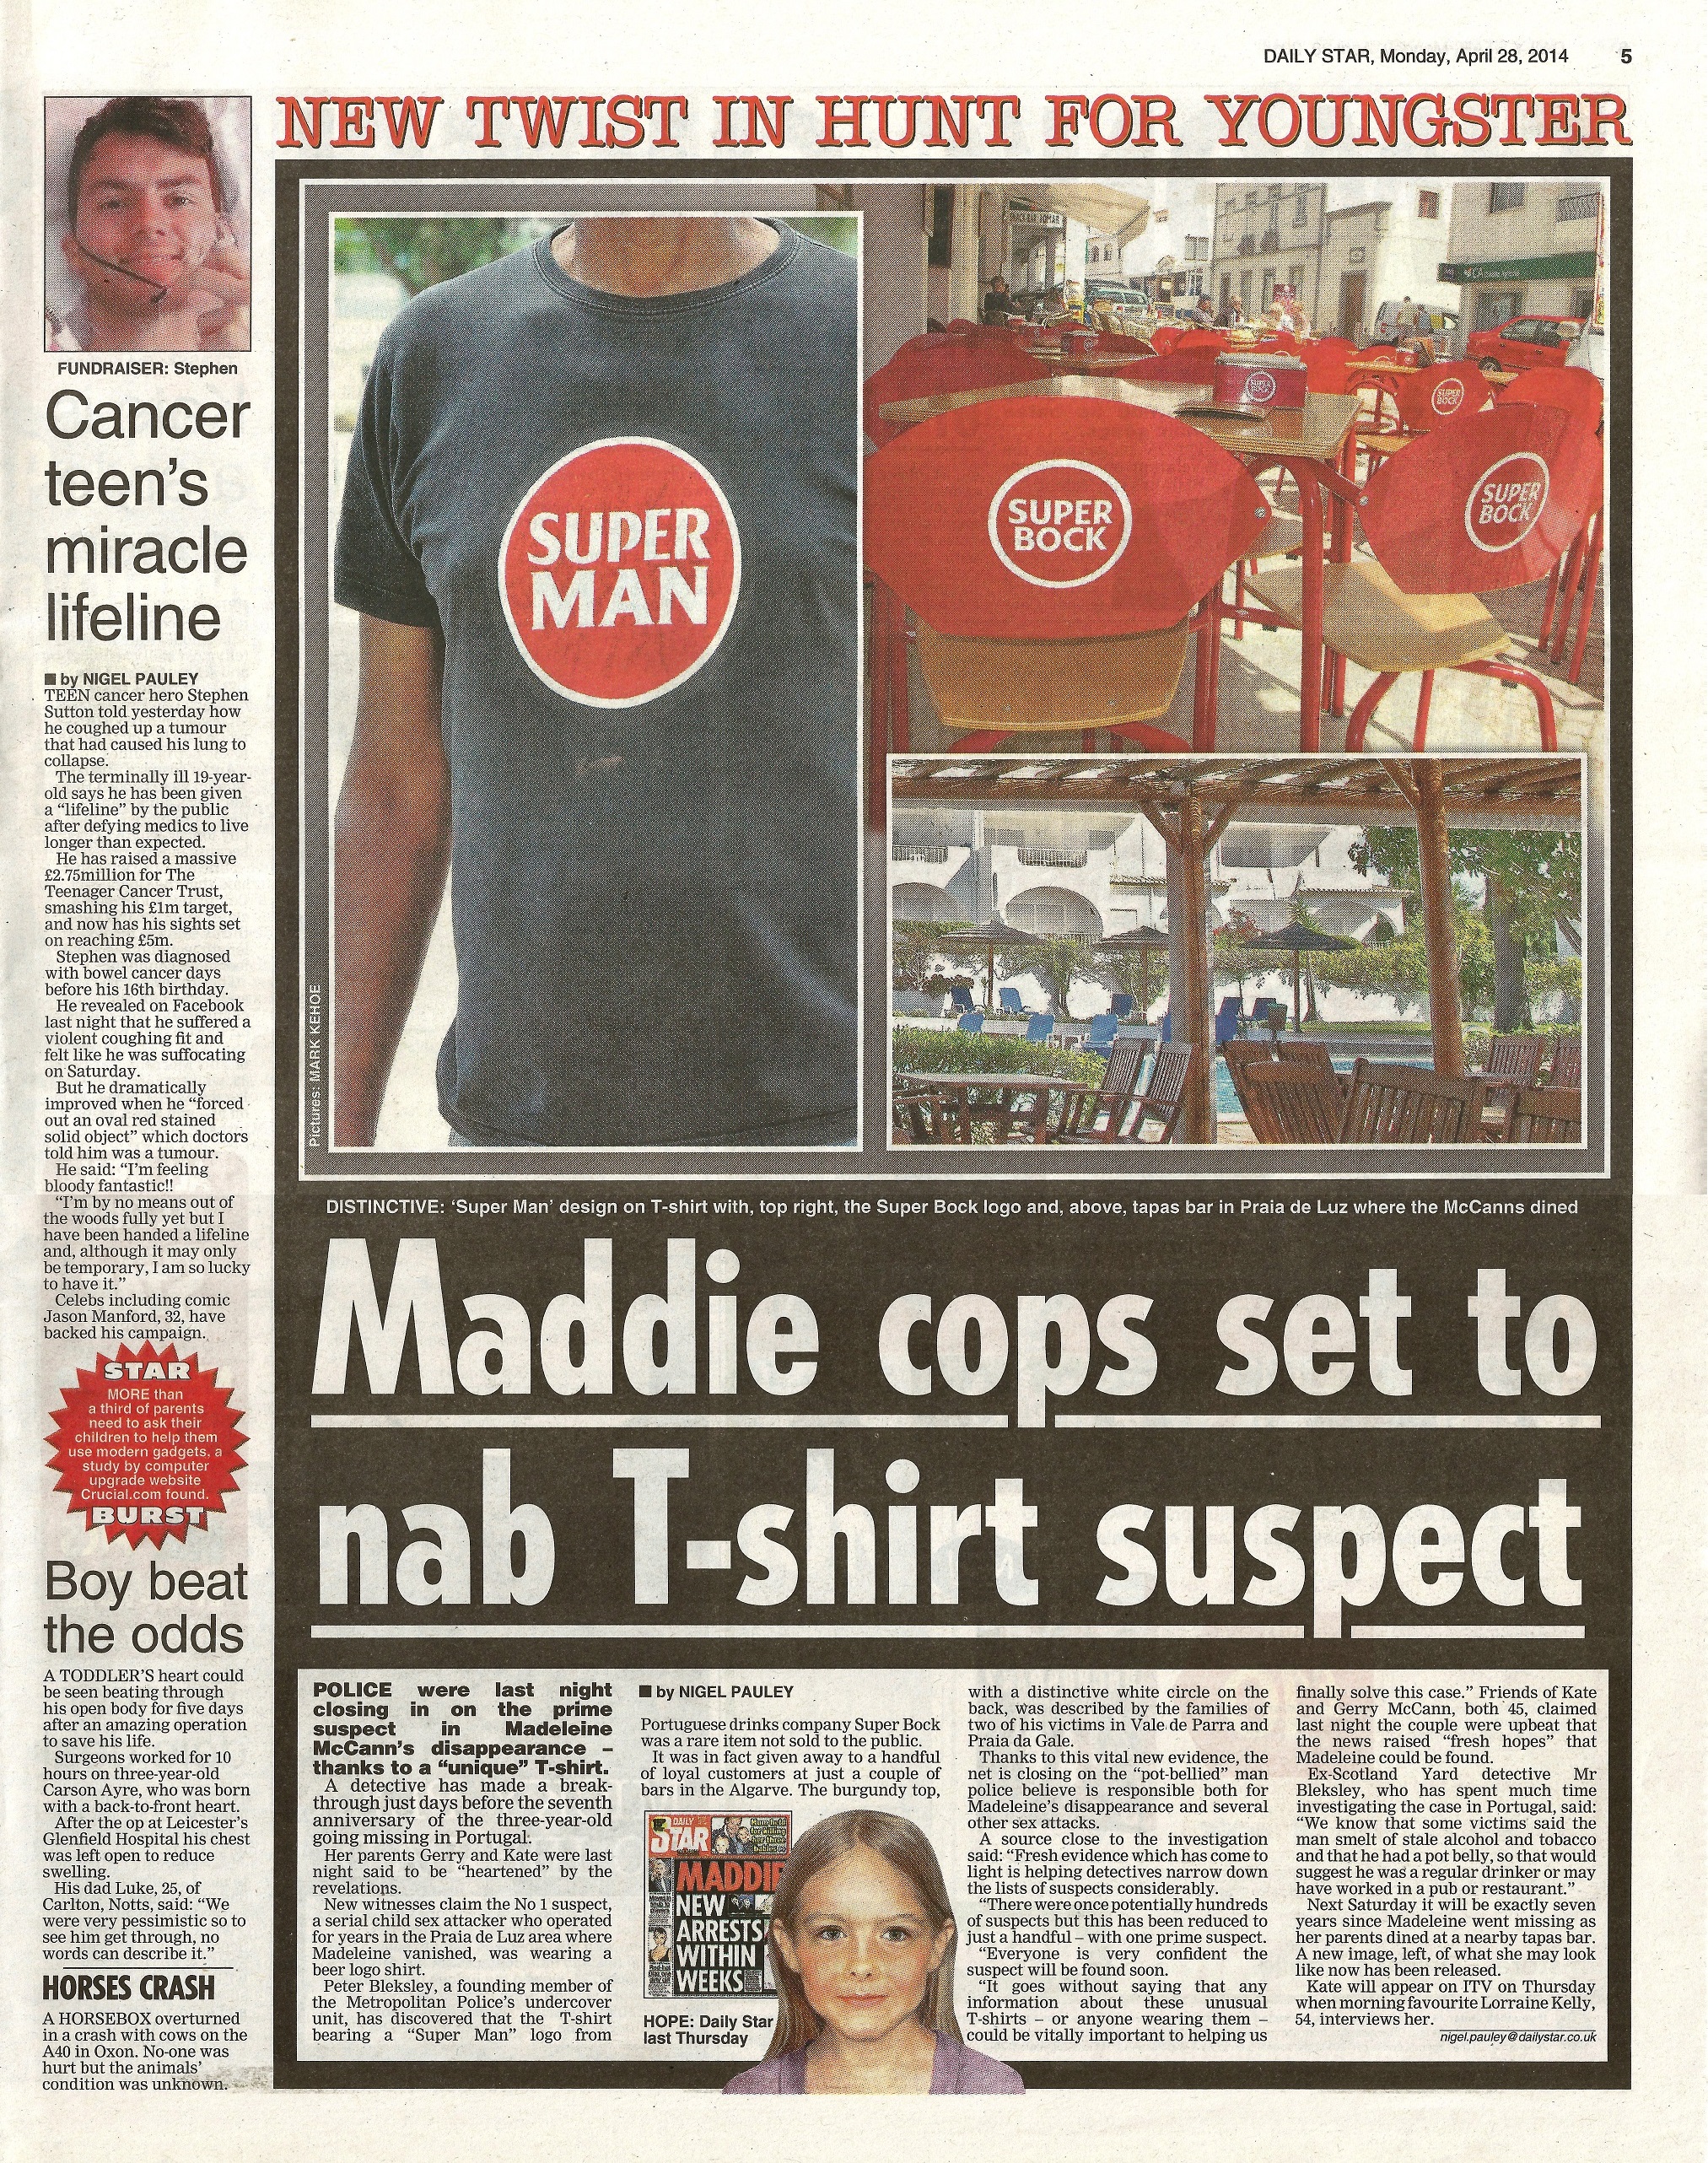 Maddie cops set to nab T-shirt suspect - Daily Star, 28 April 2014 (paper edition, page 5)